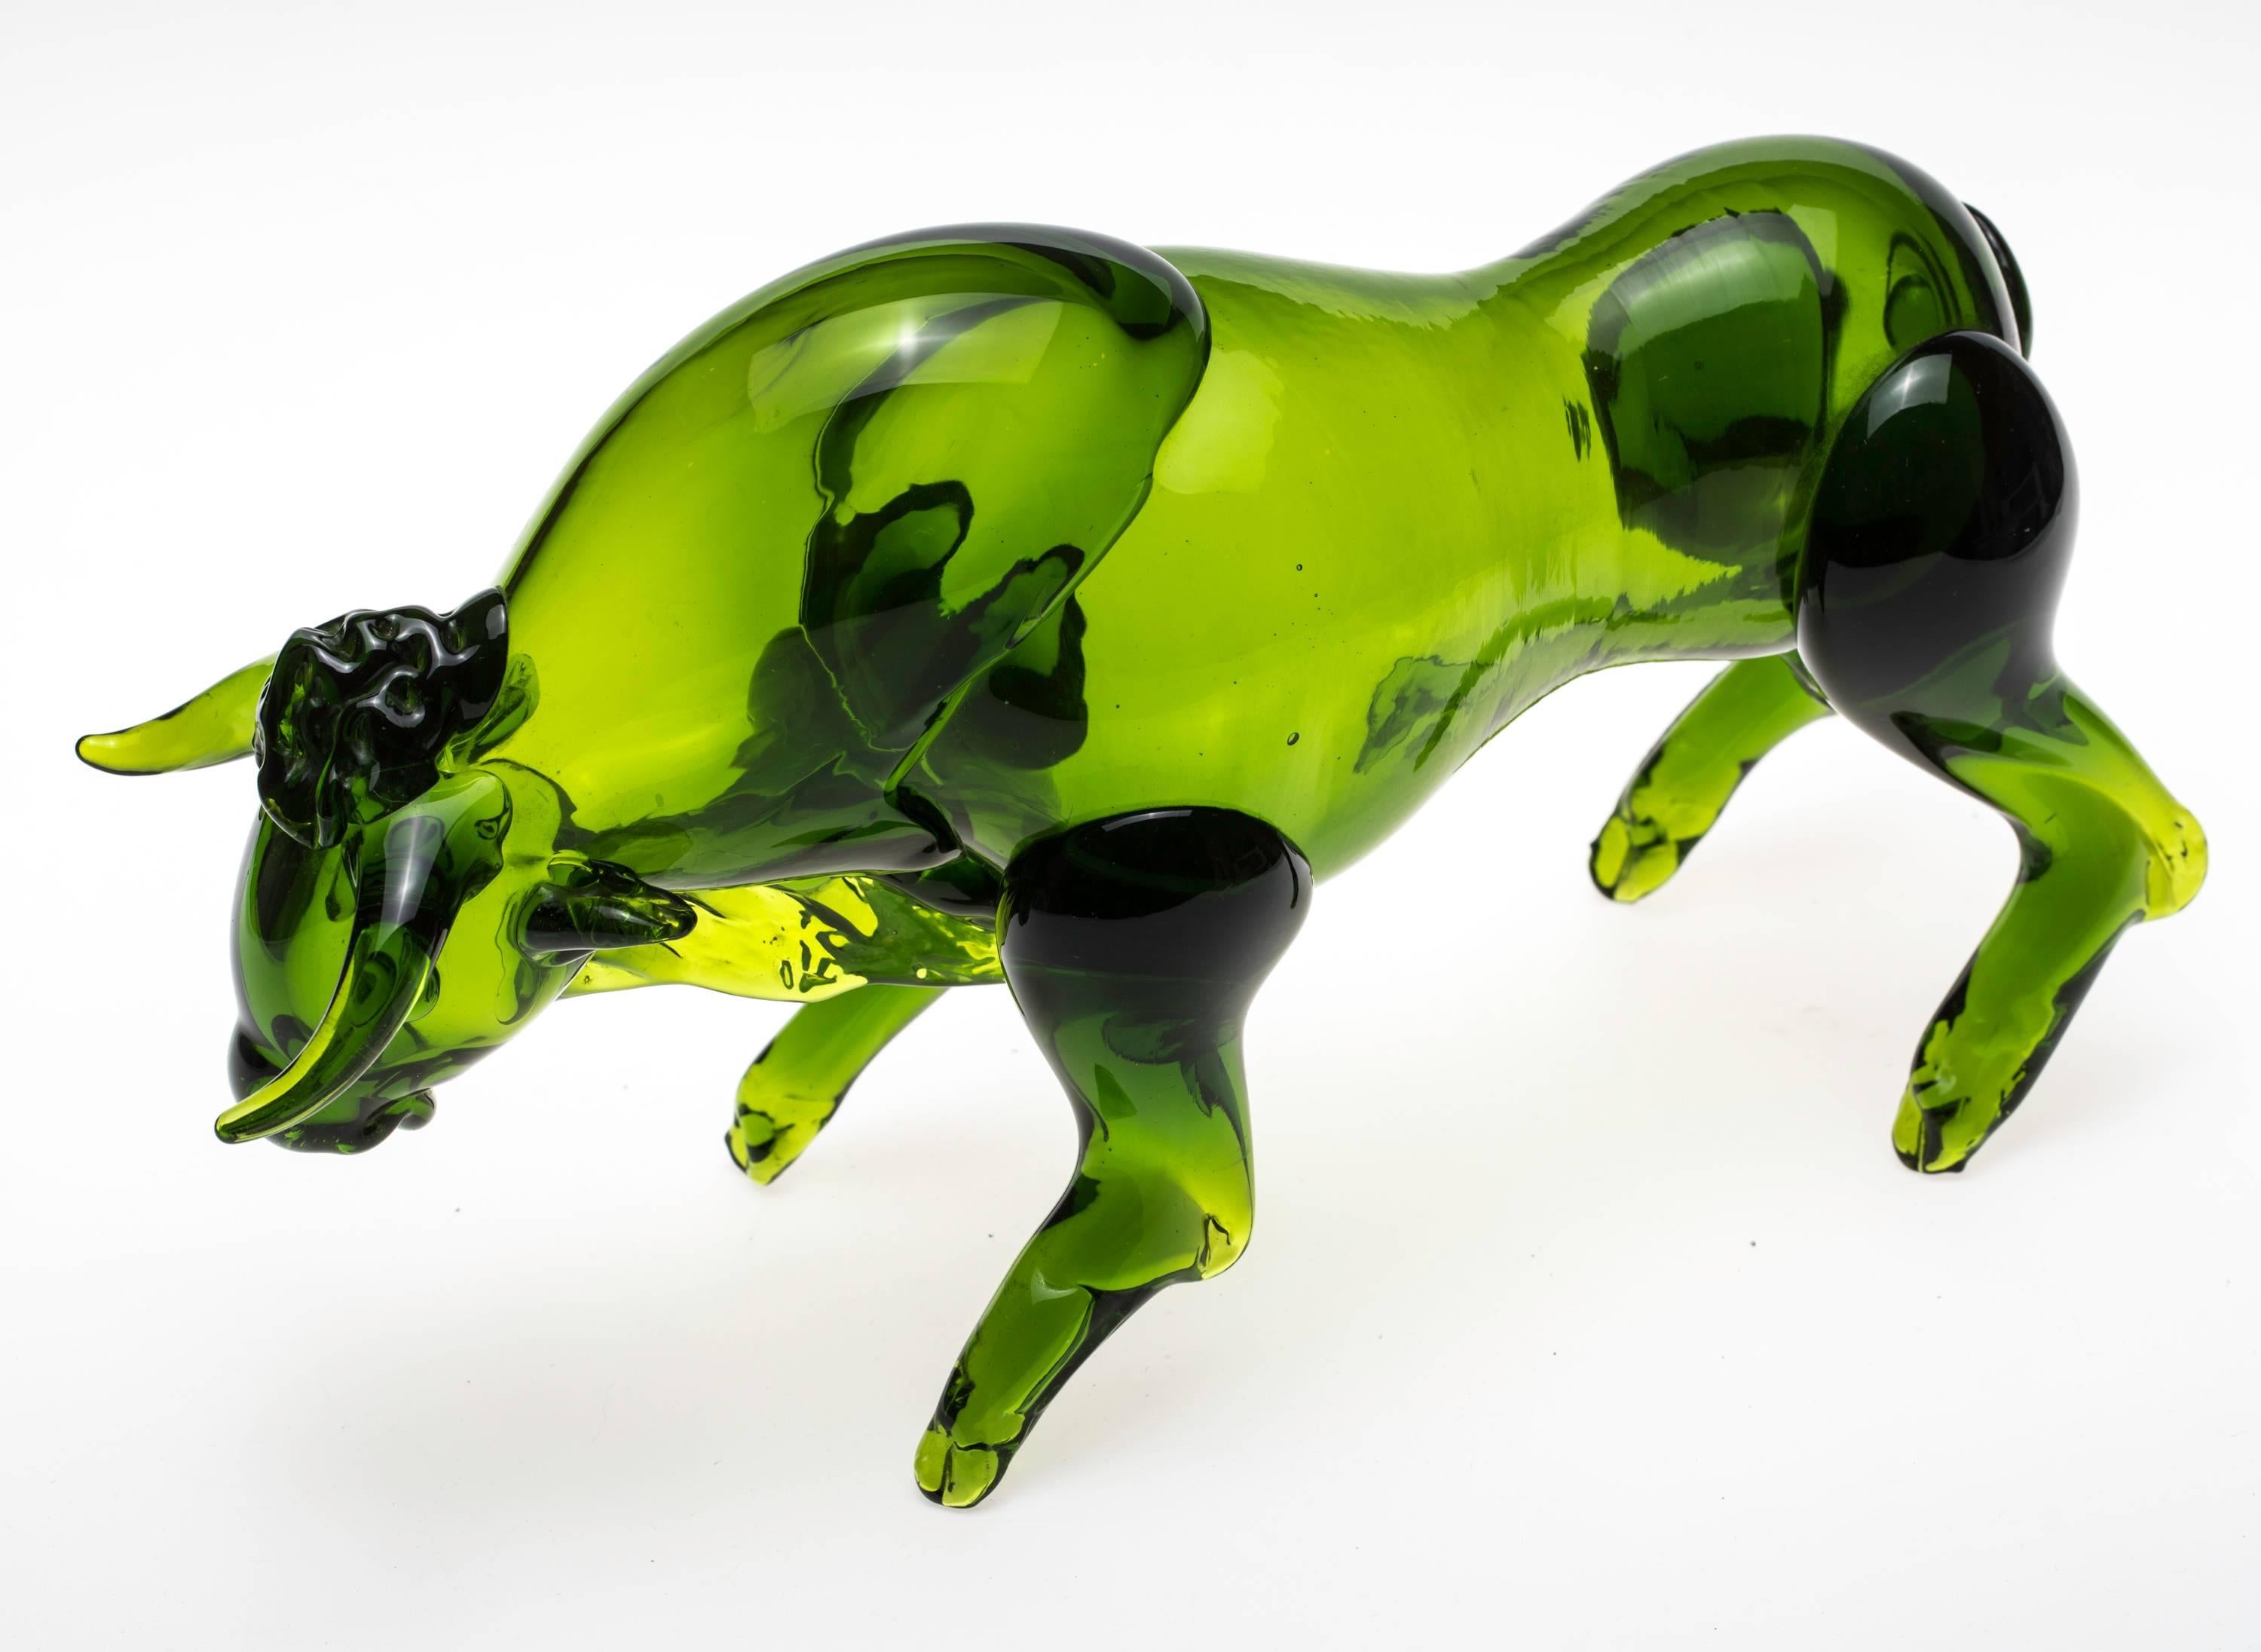 Beautifully made in Italy, Murano glass bull in true green color. Bull is standing on all four legs, head down, ready to charge. A very handsome piece!